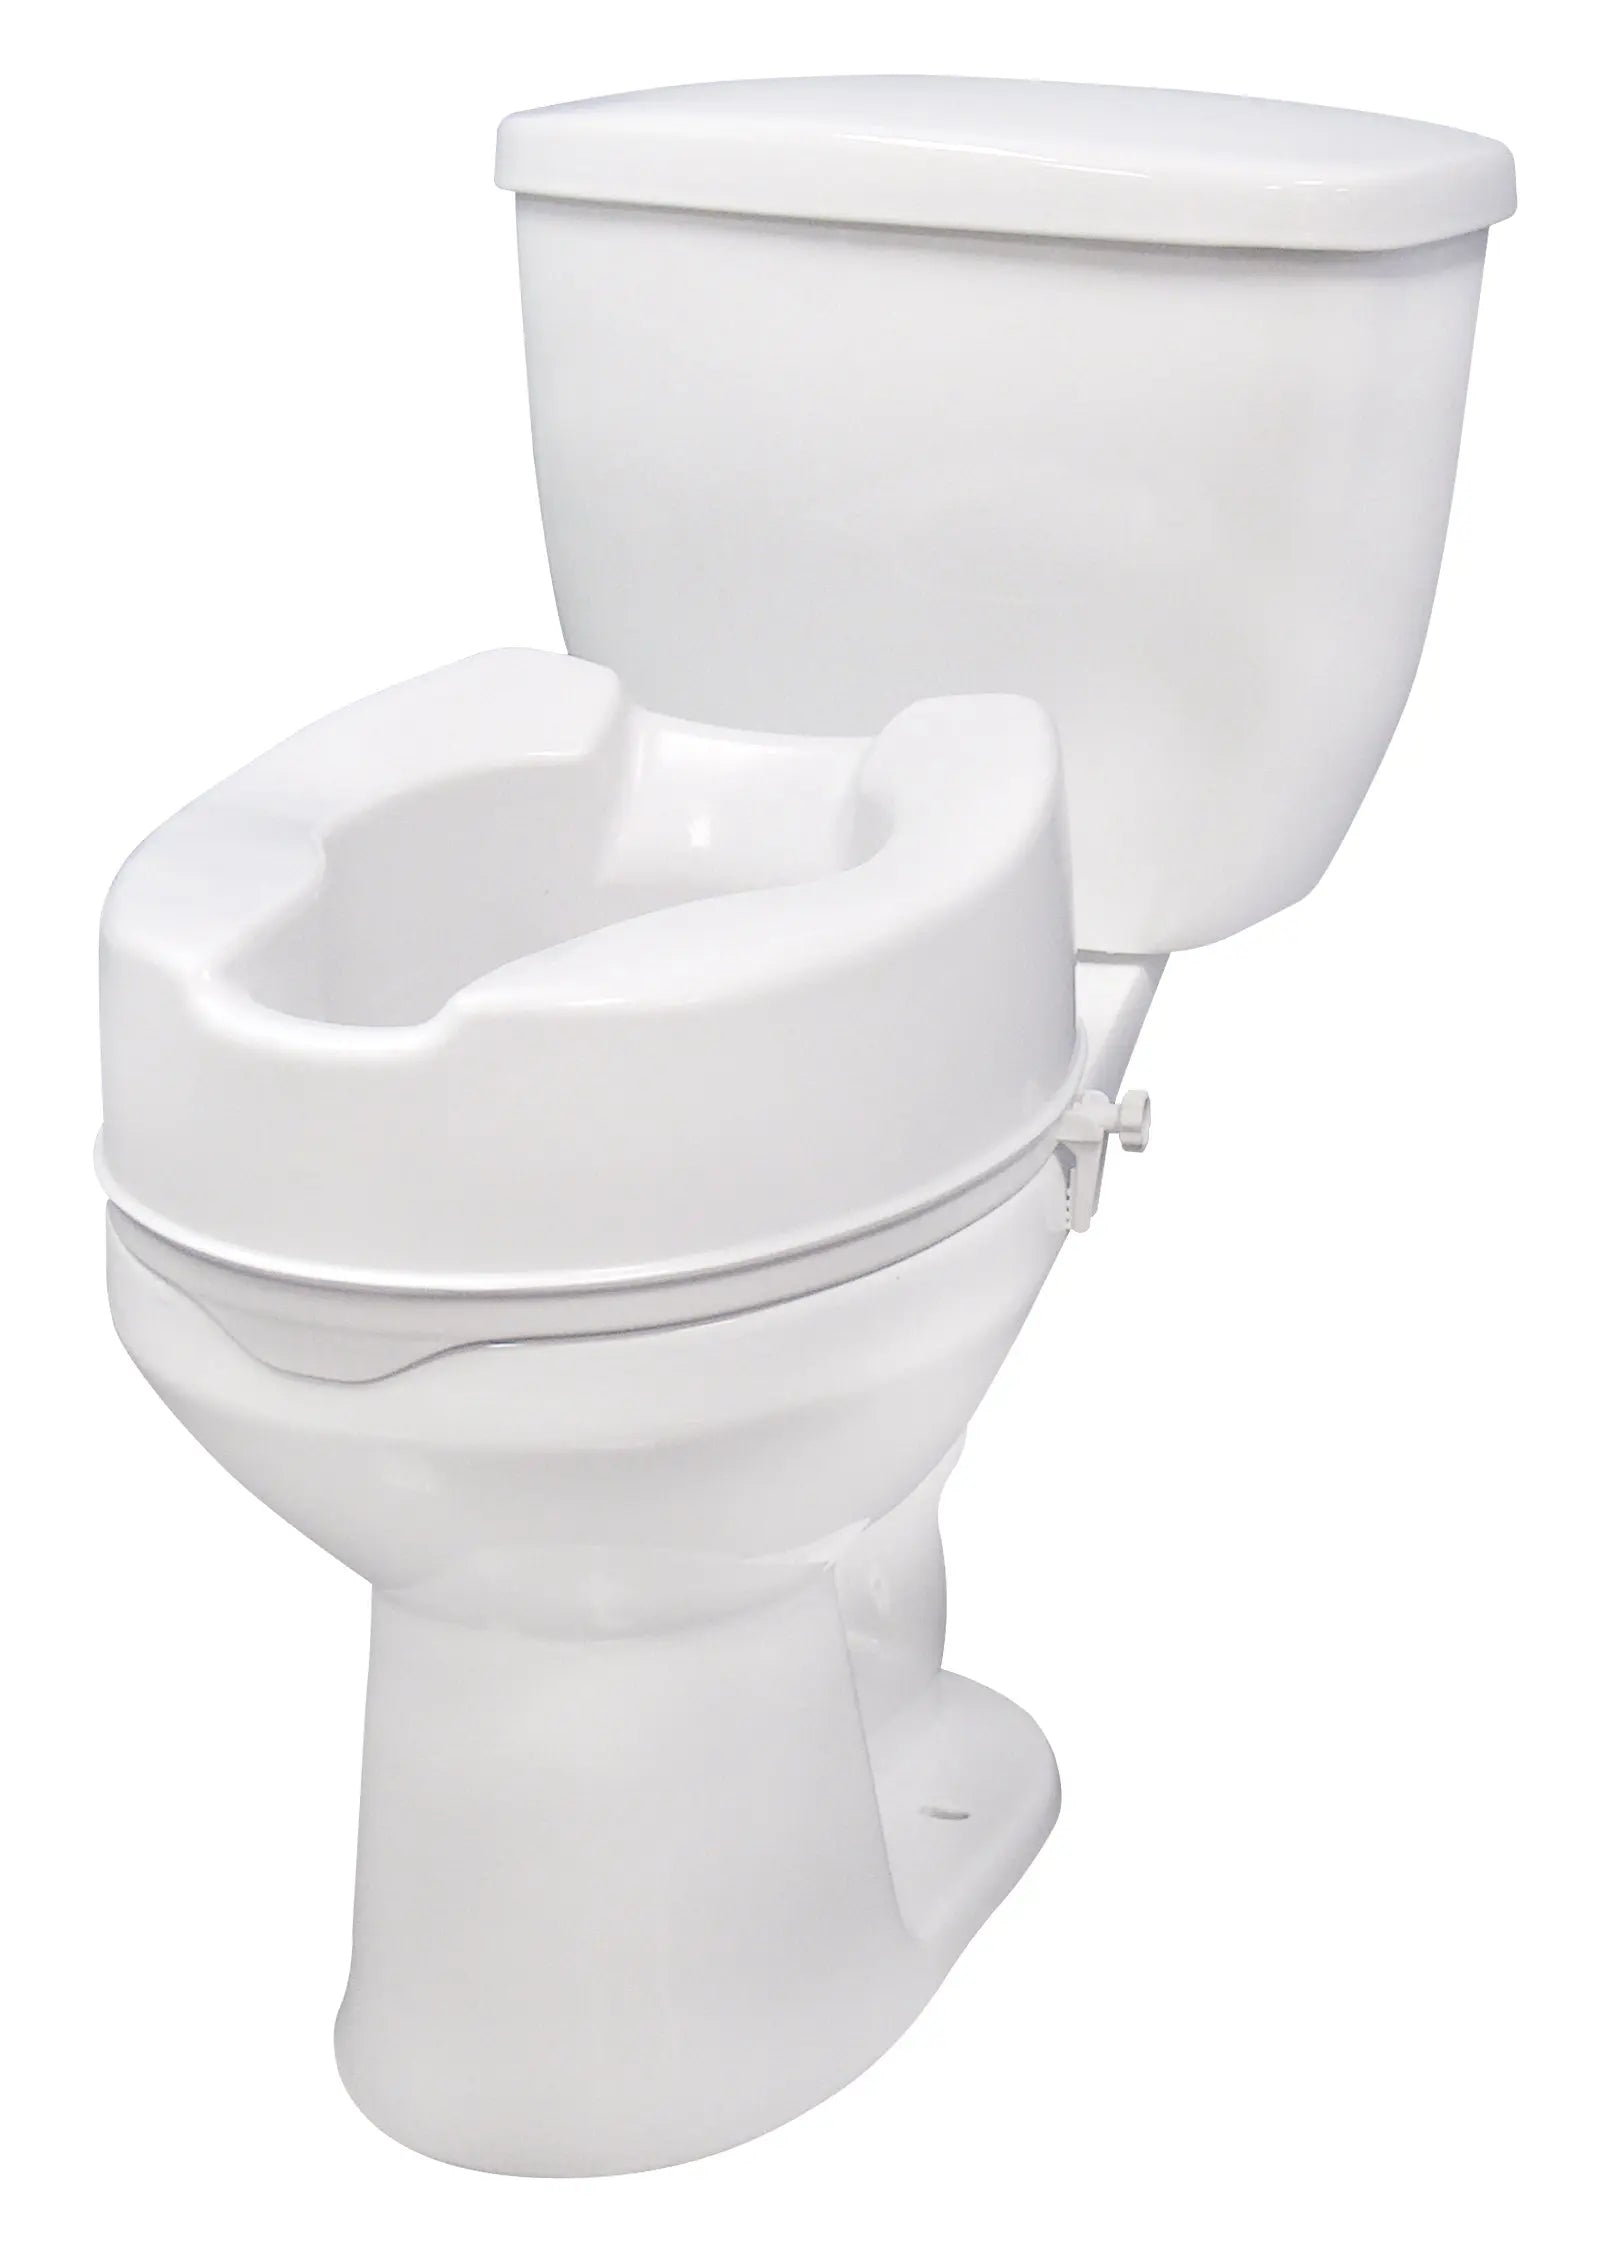 Raised Toilet Seat with Lock, Standard Seat - Home Health Store Inc